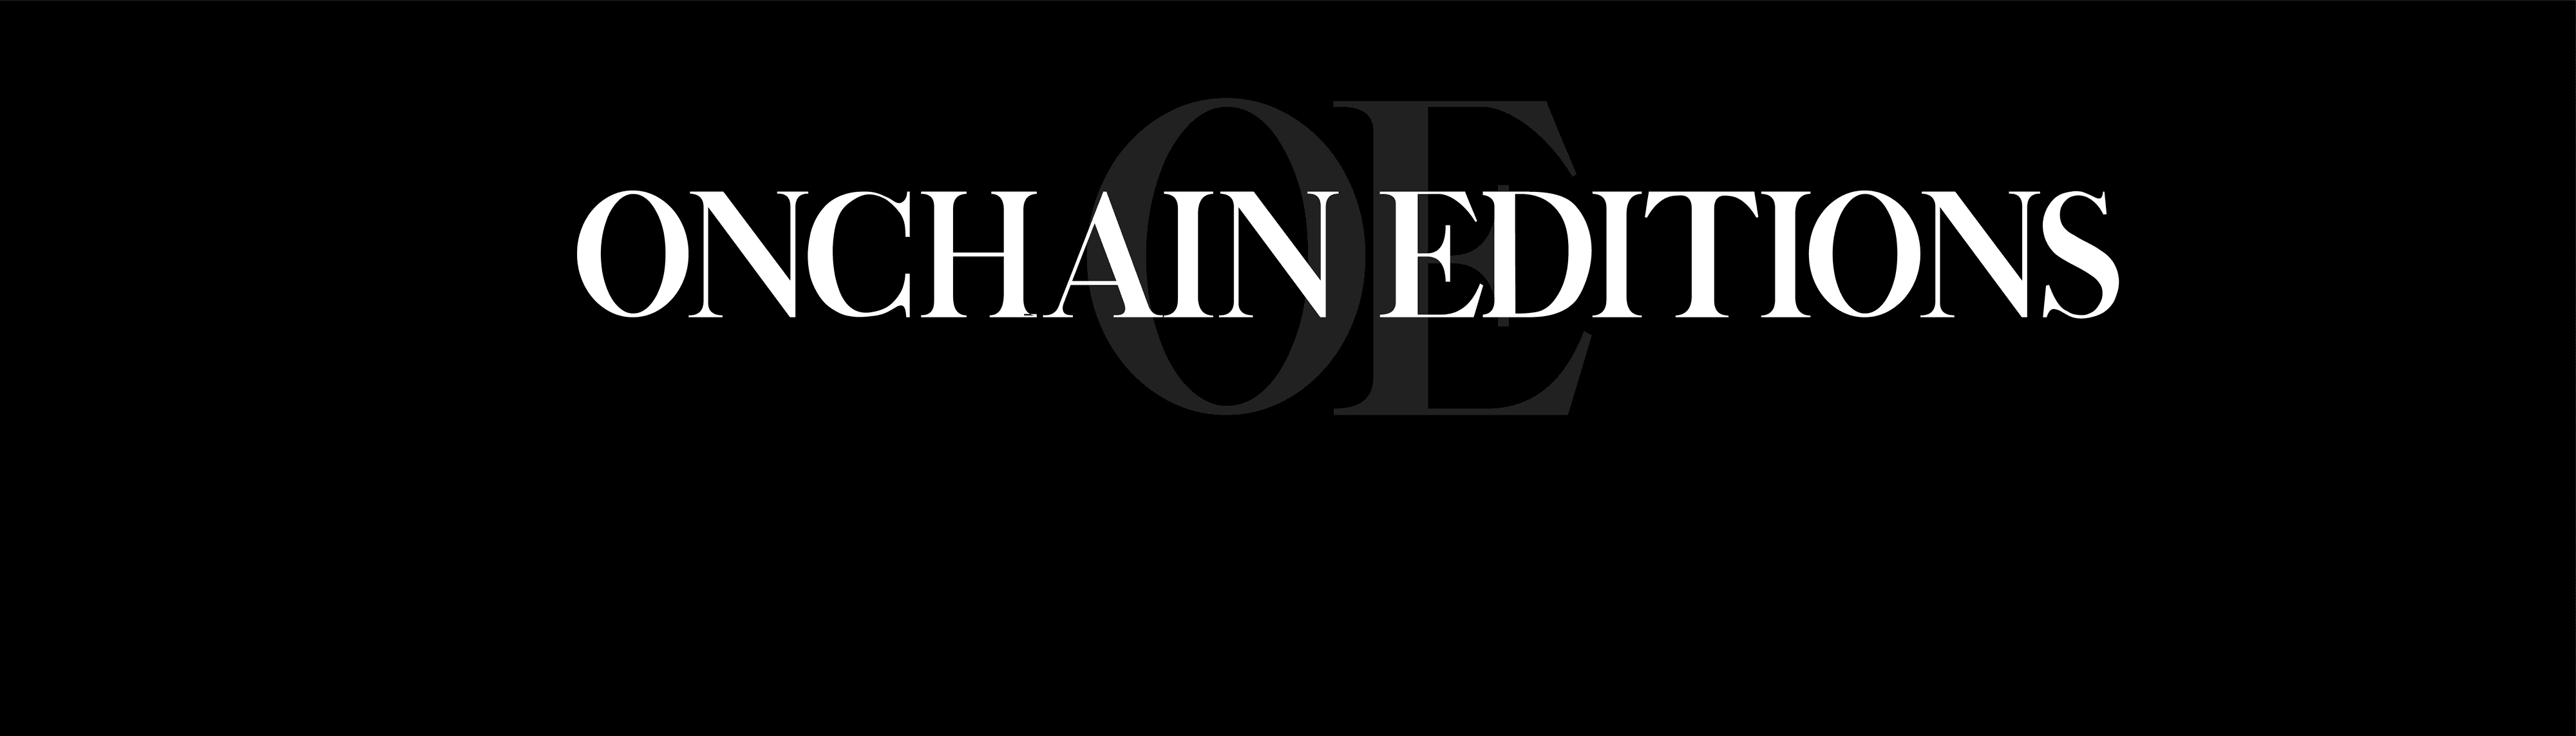 Onchain_Editions banner